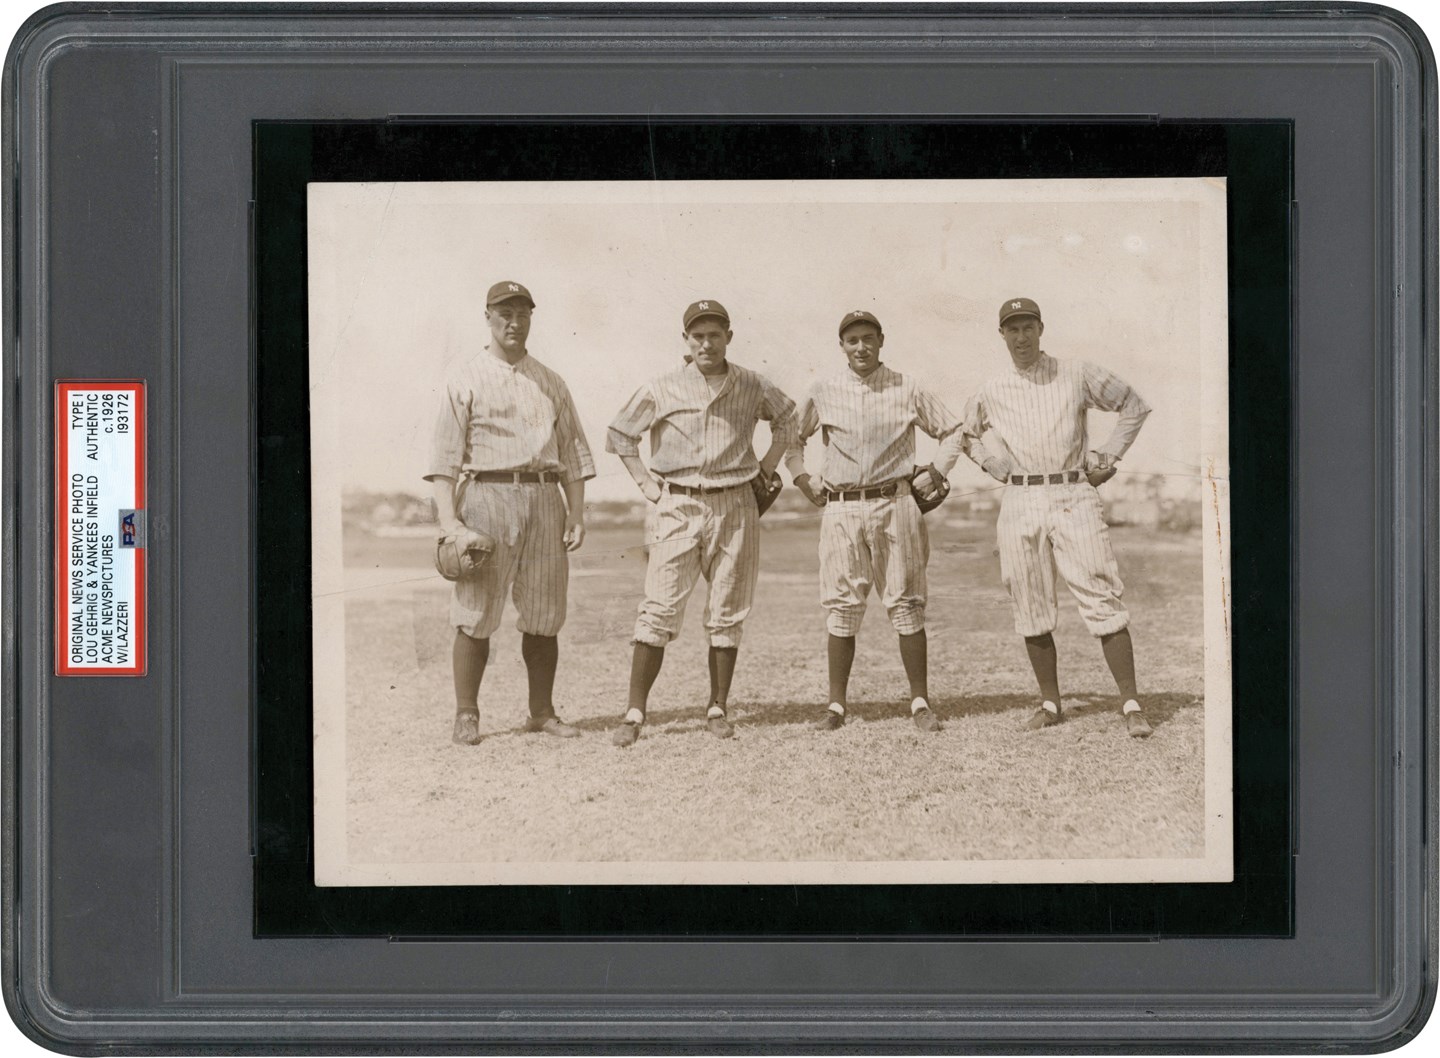 - 1926-1928 Yankees Infield w/Lou Gehrig Photograph (PSA Type I)